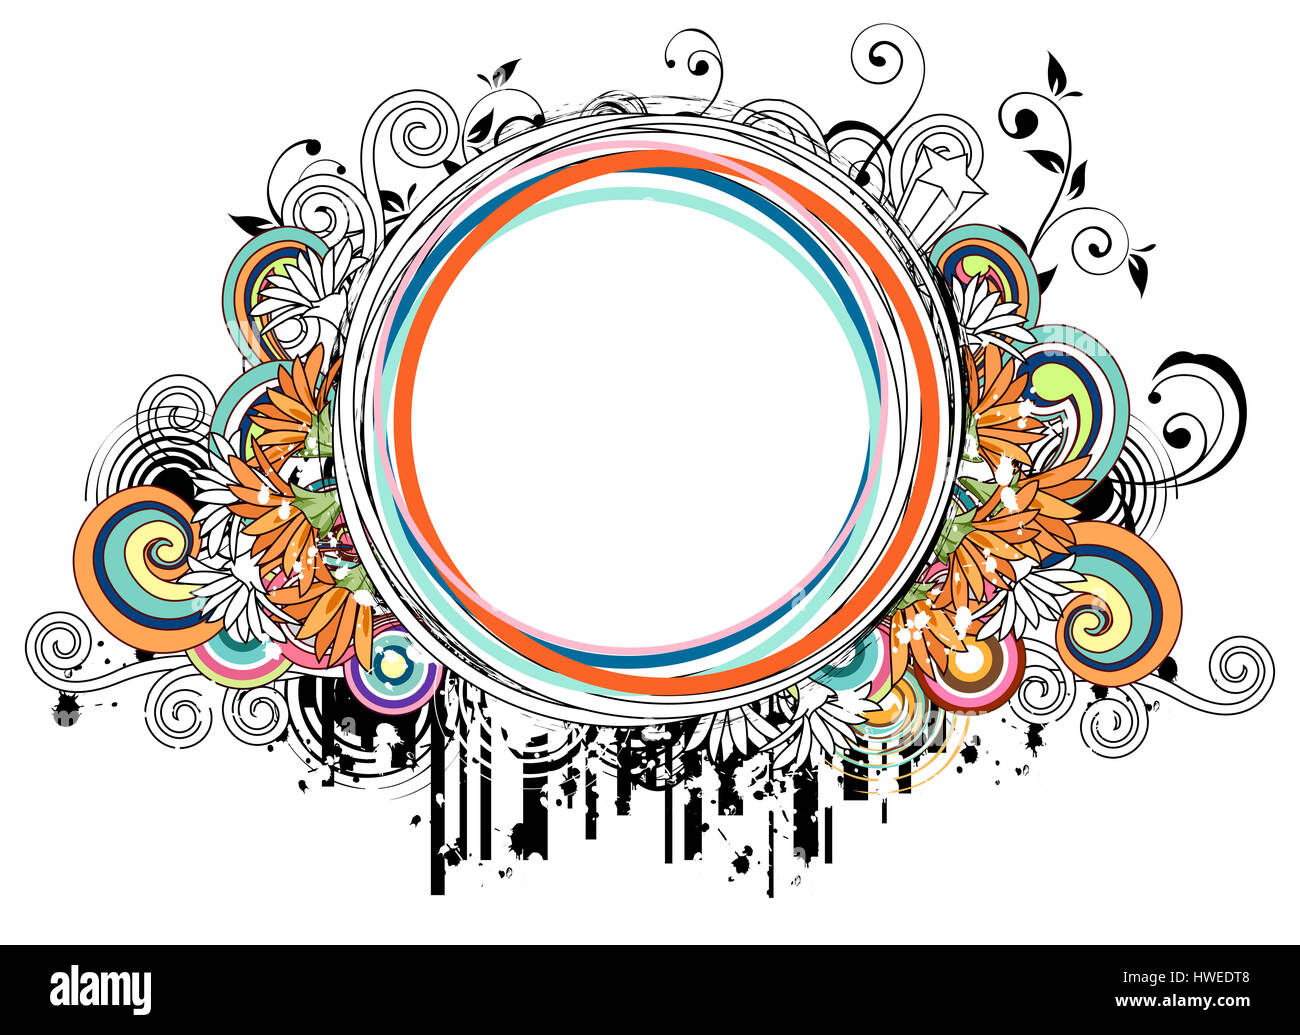 white,white background,background,abstract,art,artwork,cartoon,cgi,clip  art,colorful,color image,computer graphics,creative,digital art,digital  technology,drawing,illustrate,illustration,imagination,imaginative,painted  image,painting,vector,drawing ...